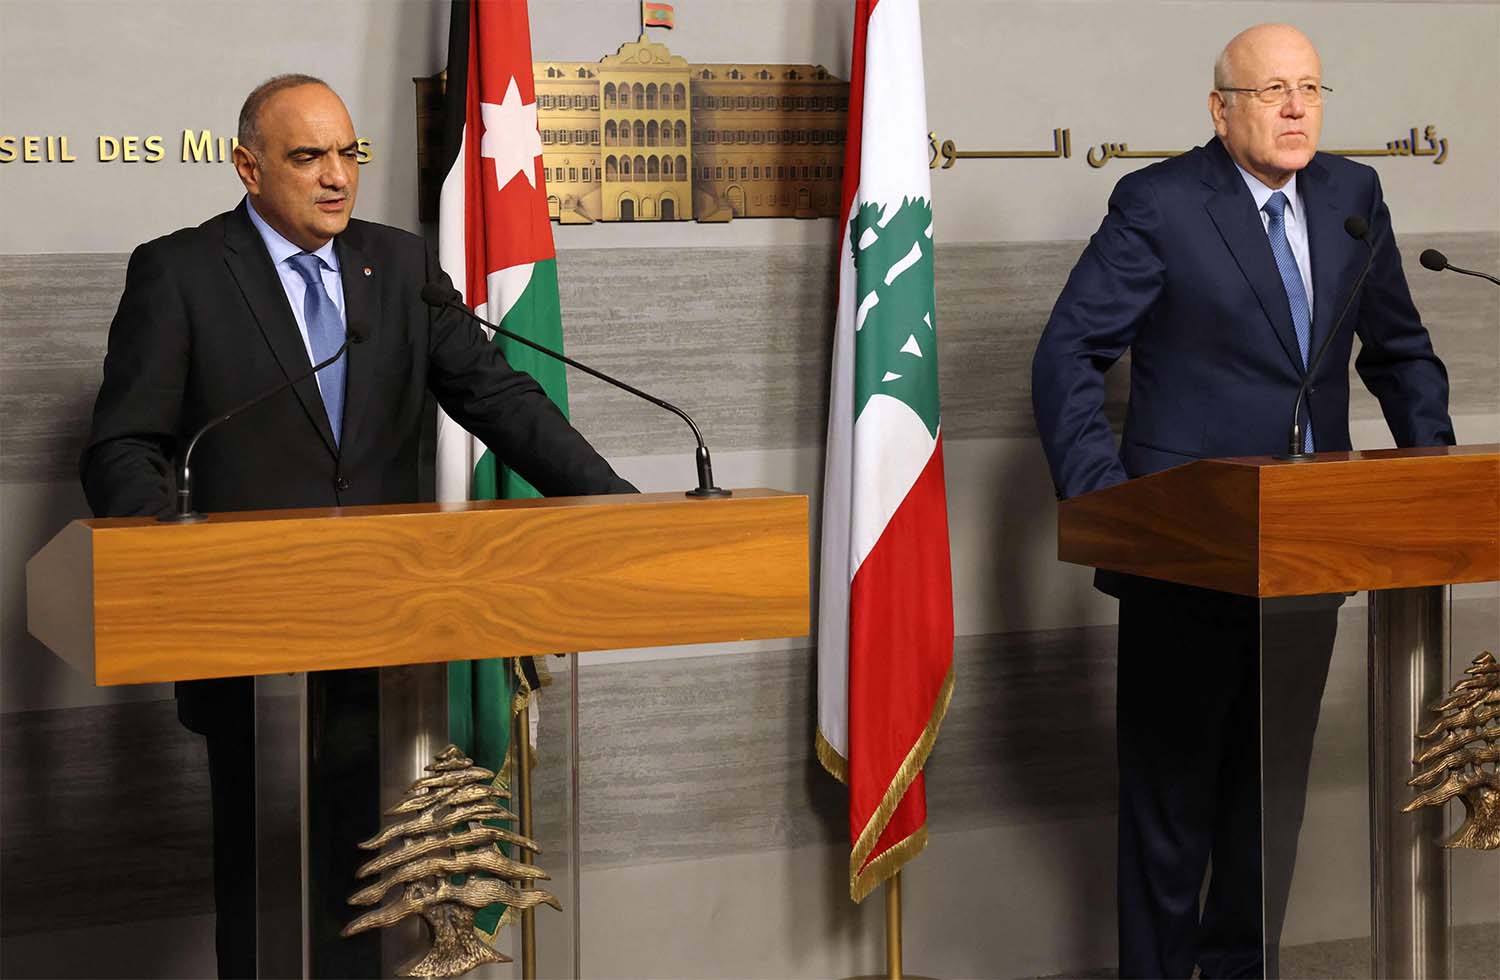 Khasawneh said Jordan is committed to supporting Lebanon’s stability